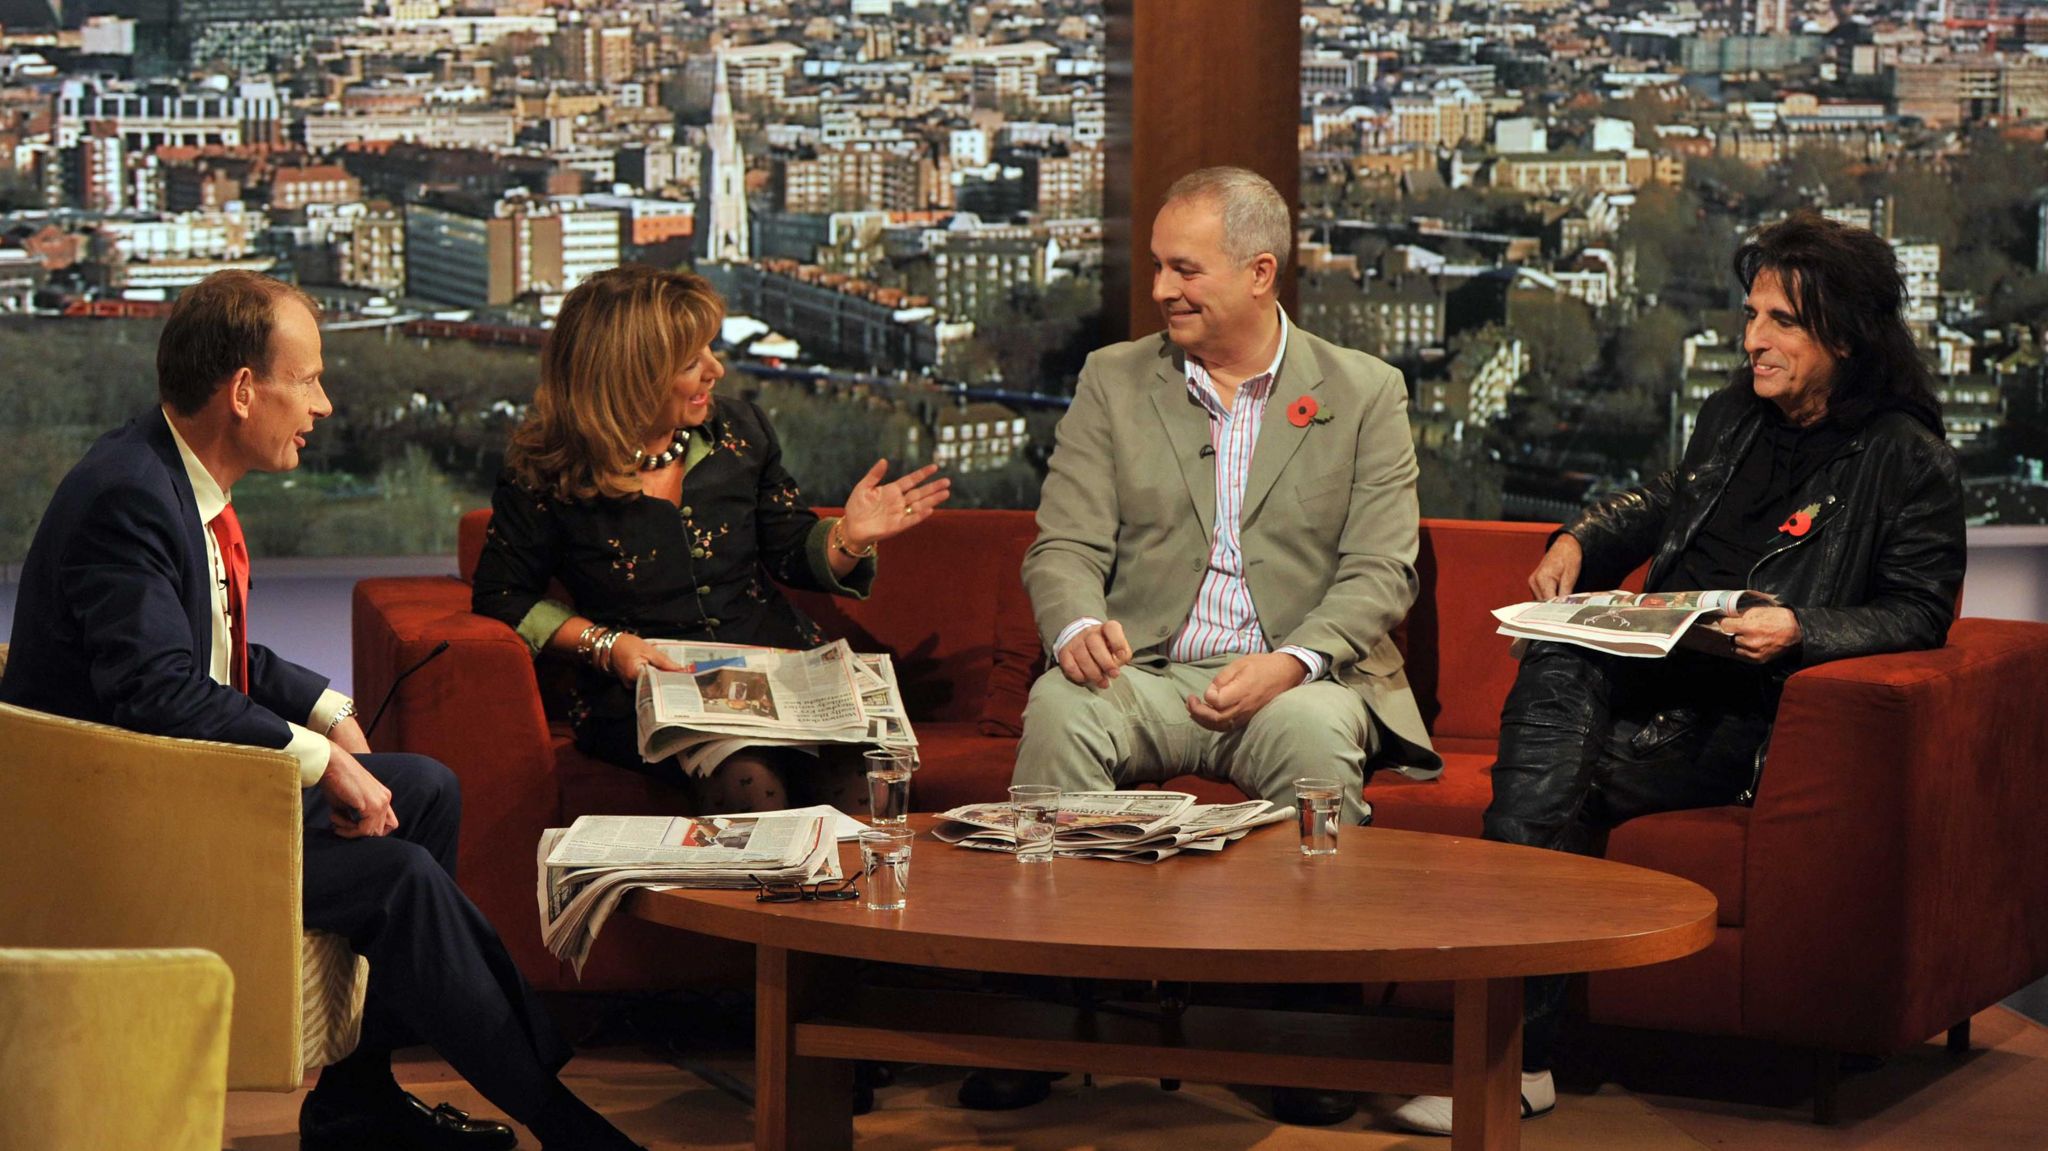 Andrew Marr, Baroness Helena Kennedy, Iain Dale and Alice Cooper on a TV panel show